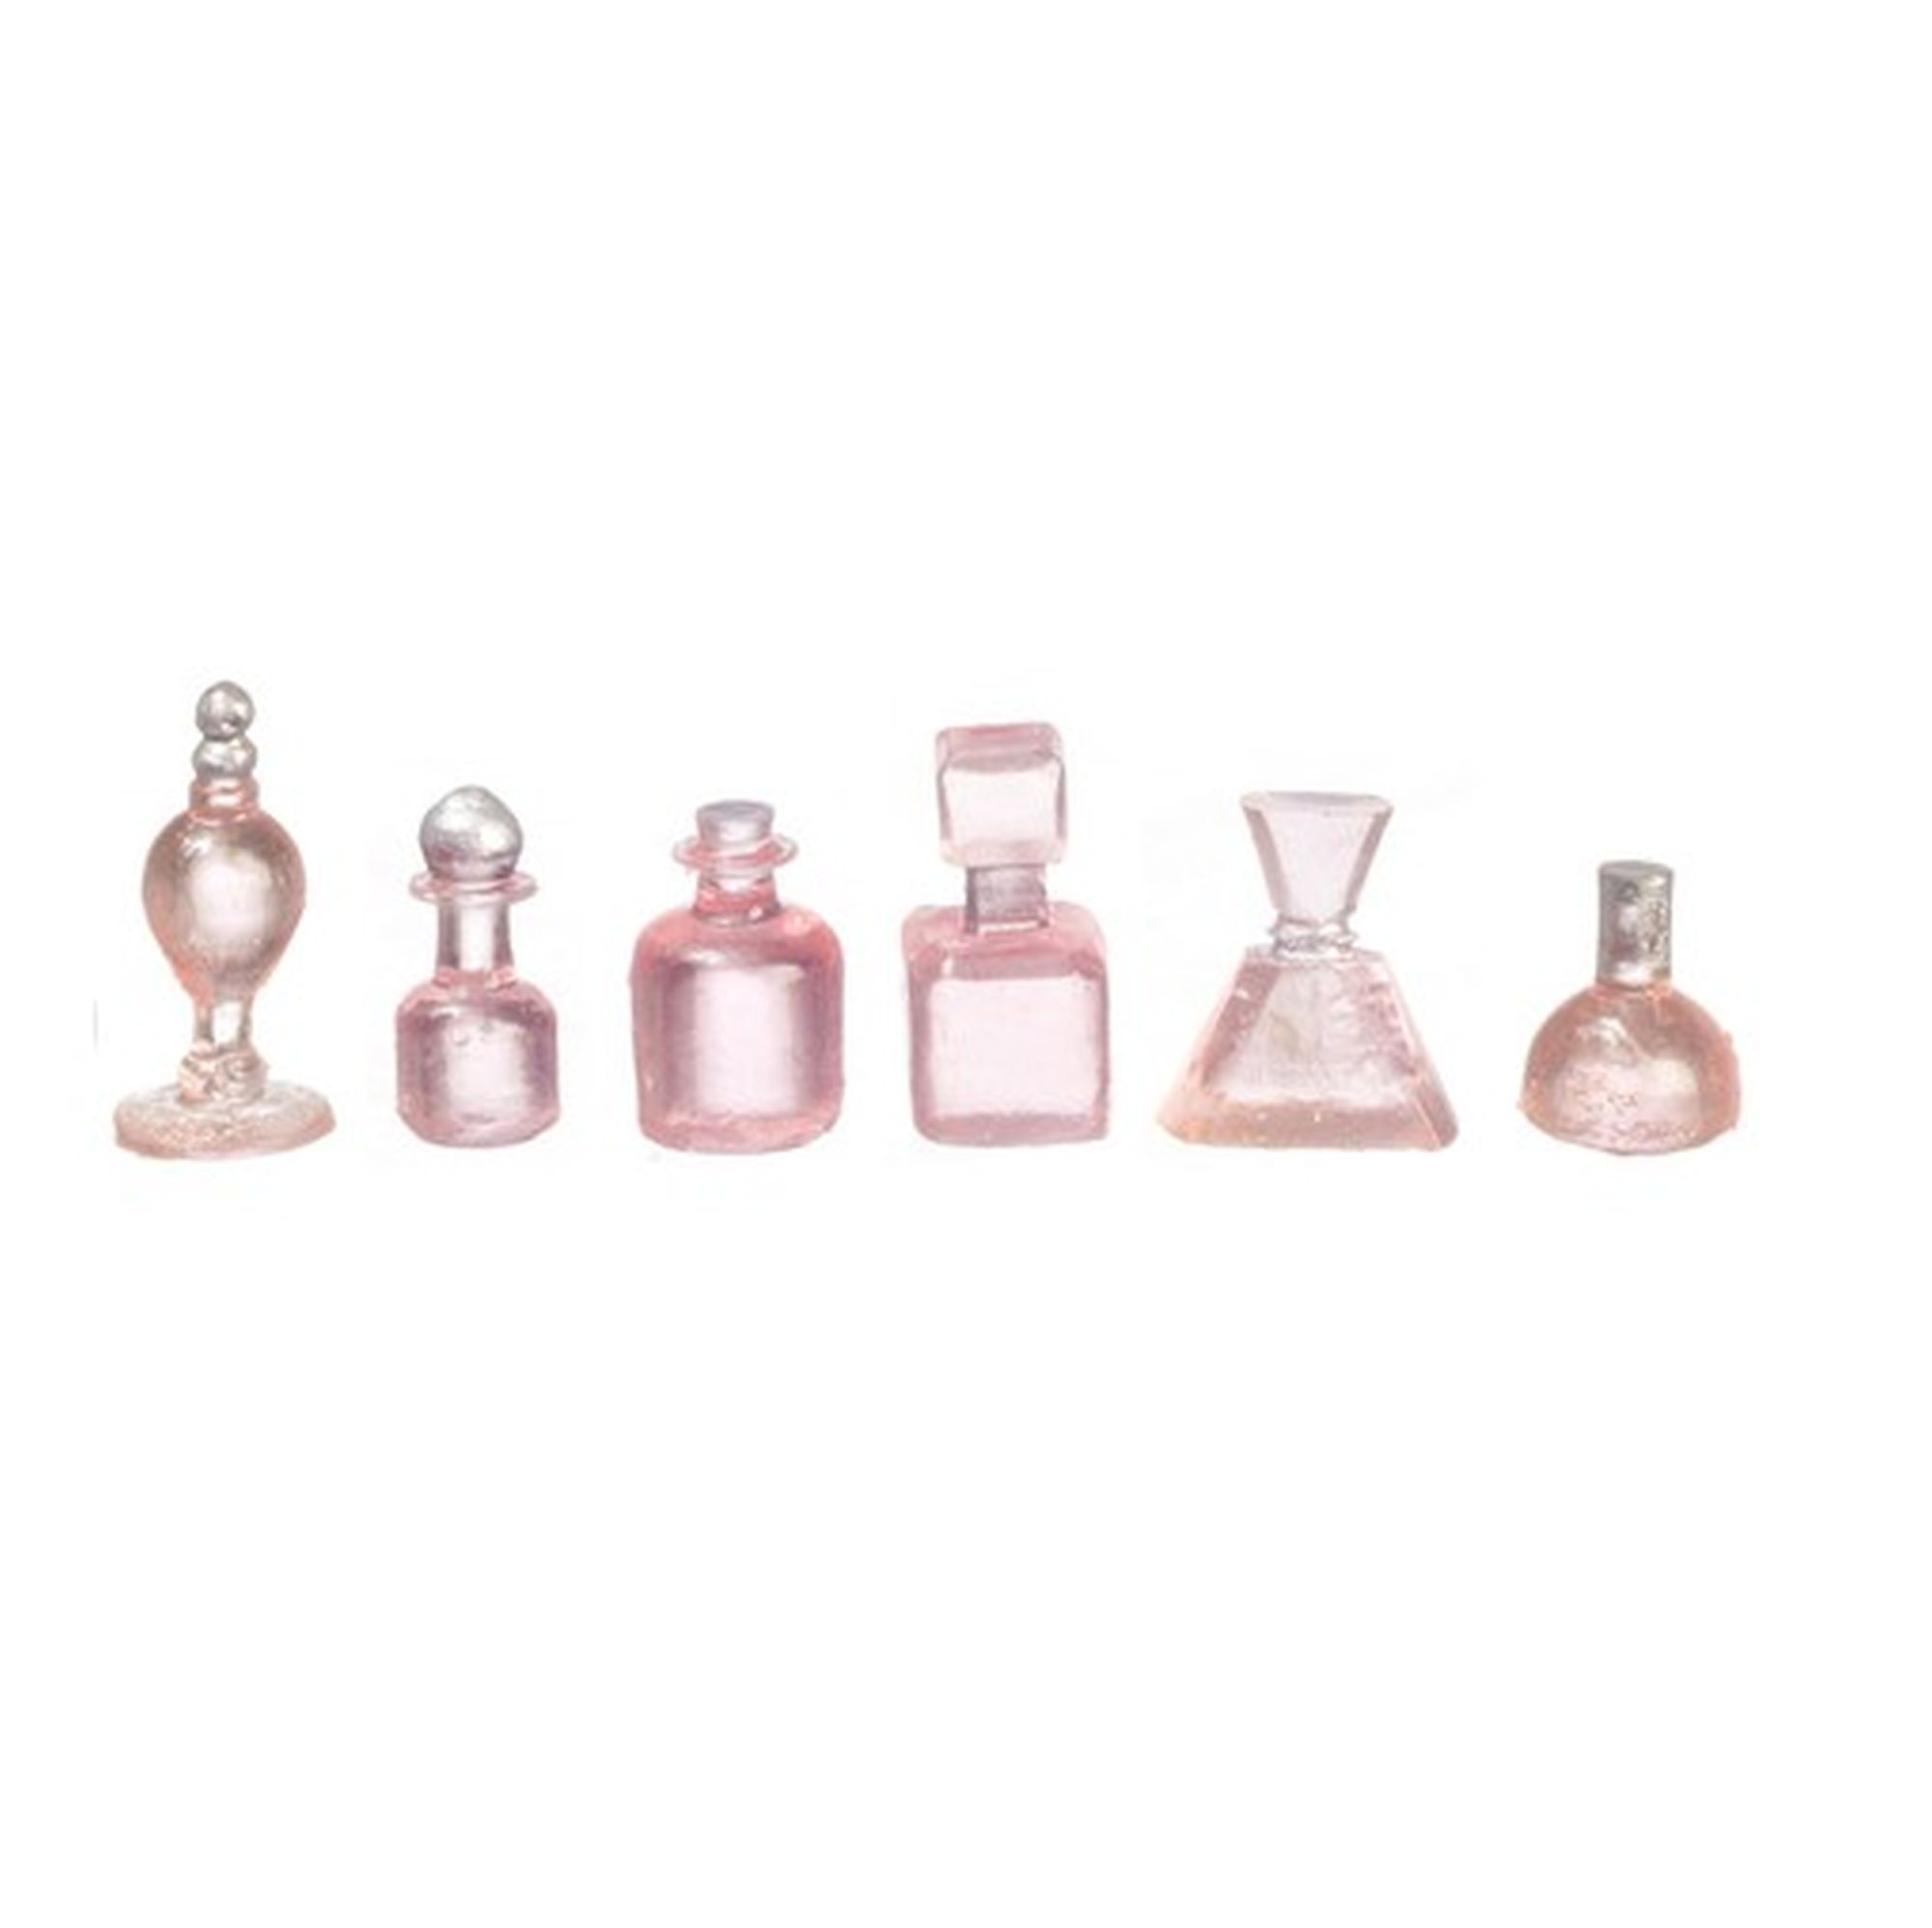 Set of 6 Assorted Pink Perfume Bottles by Falcon Miniatures A4689PK